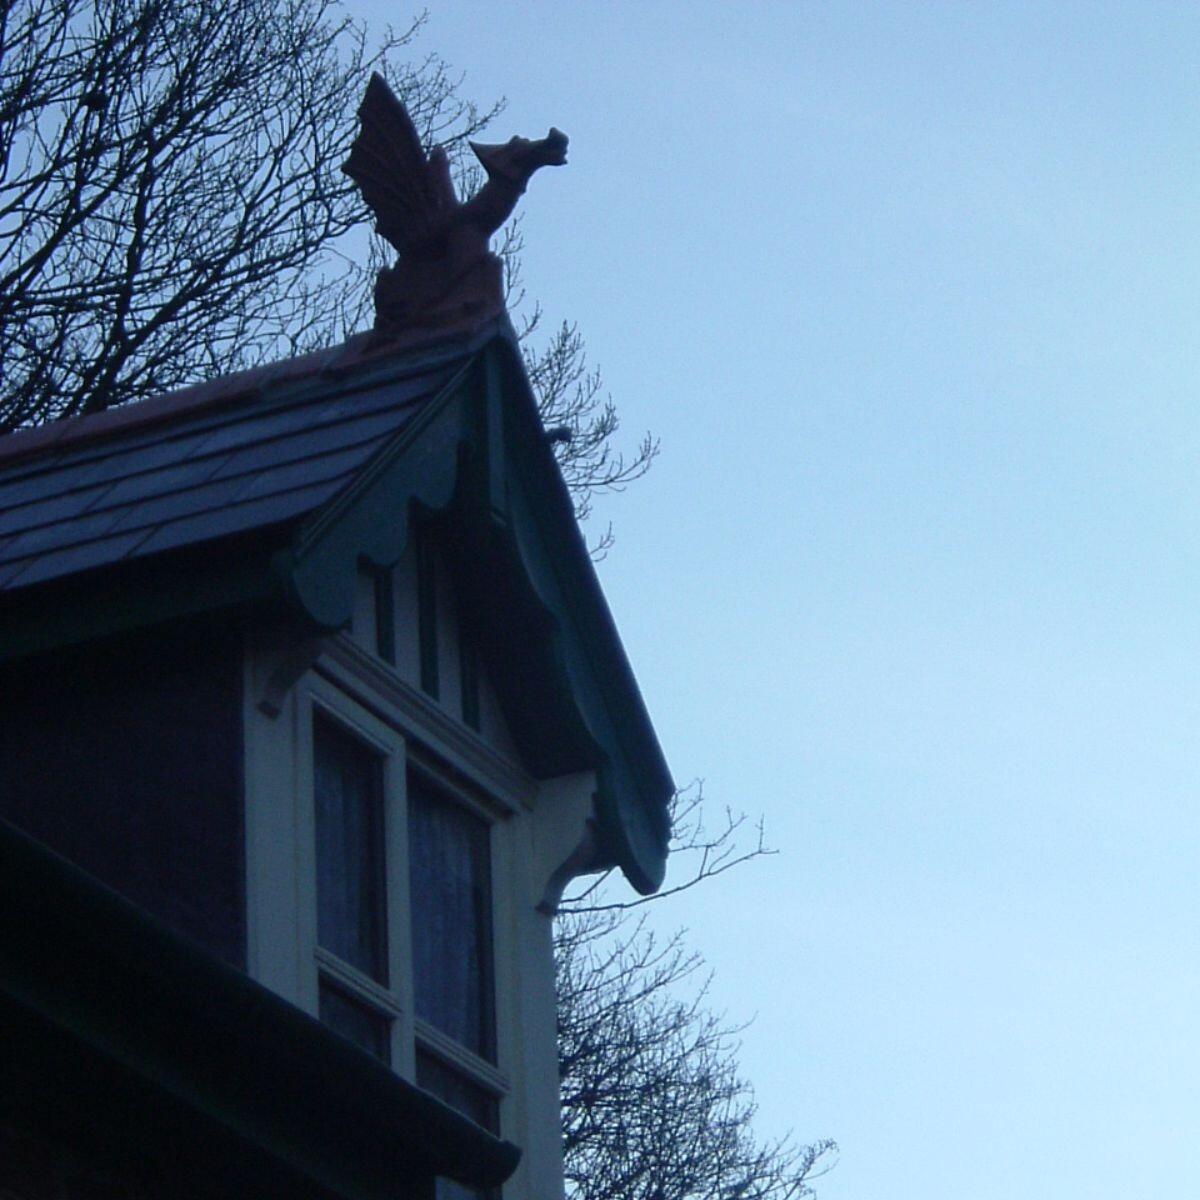 Emperor dragon finial installed on a roof overlooking stream